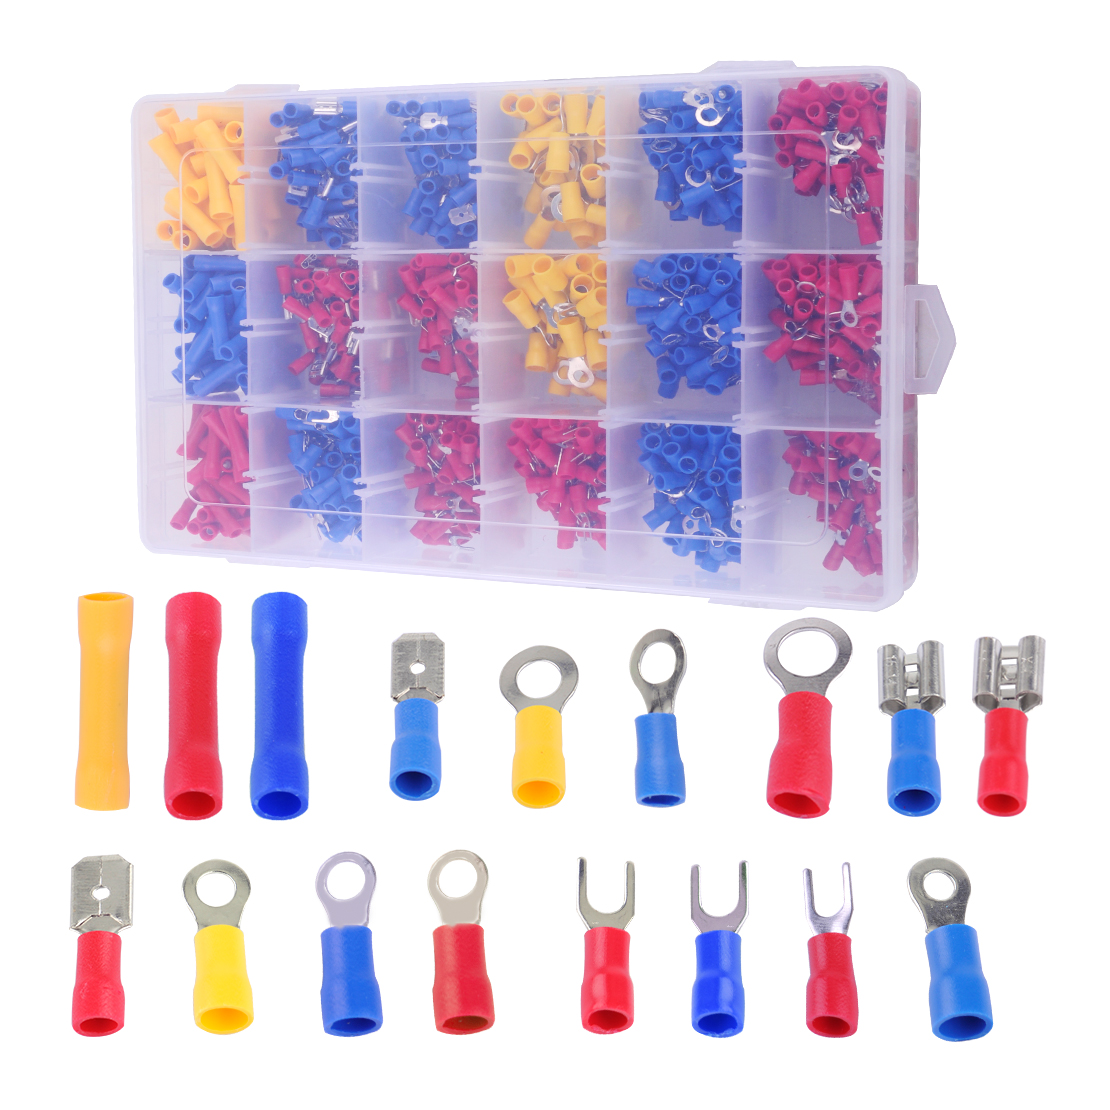 1200 Pcs Assorted Electrical Wiring Connectors Crimp Terminal Set Kits Insulated